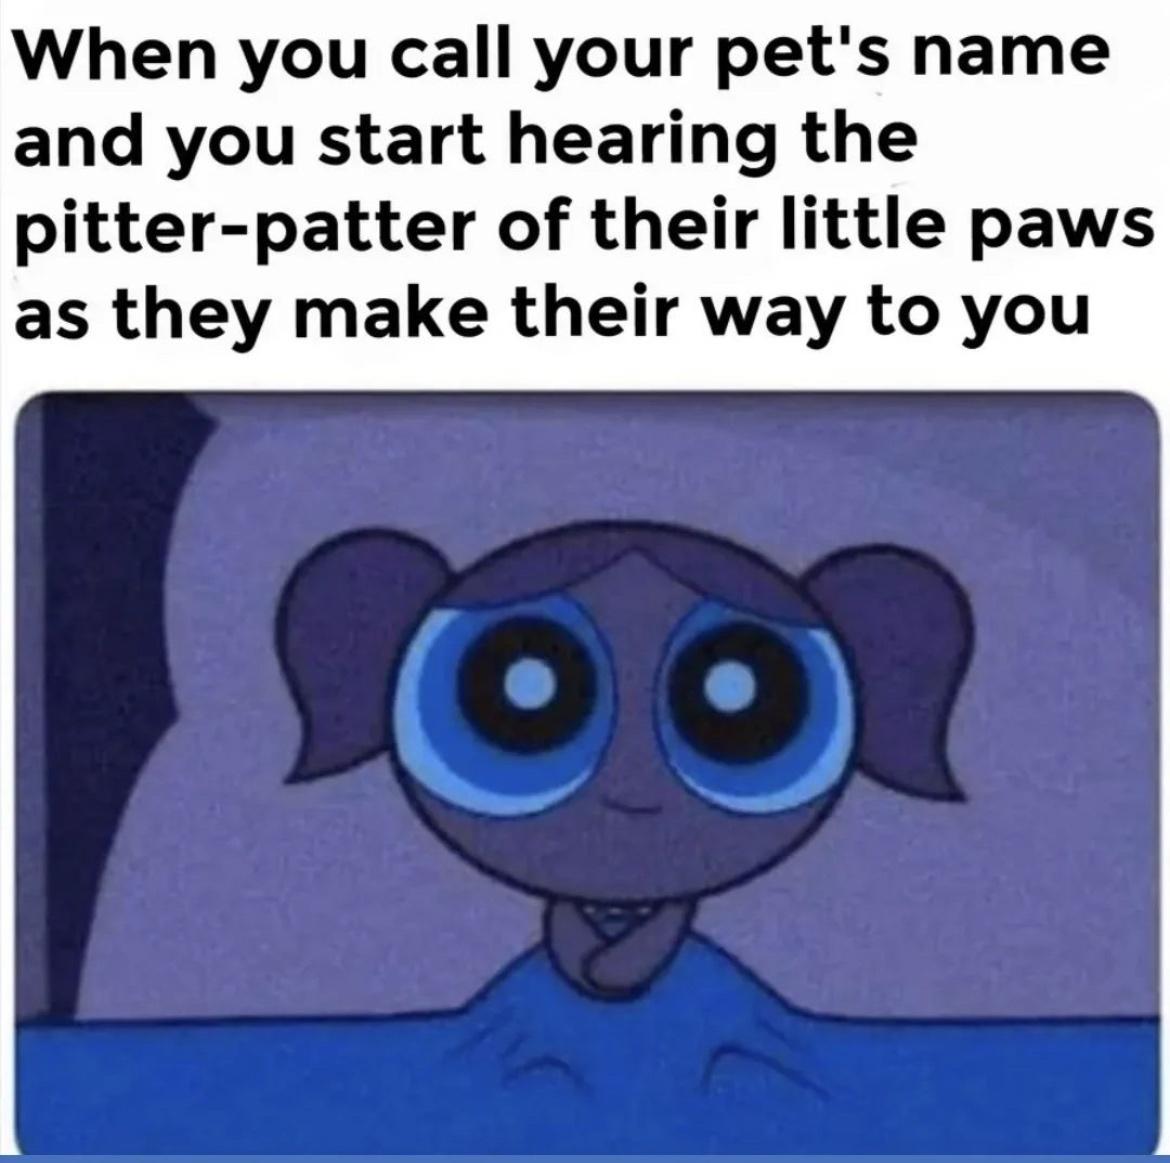 funny memes and pics - cartoon - When you call your pet's name and you start hearing the pitterpatter of their little paws as they make their way to you fool